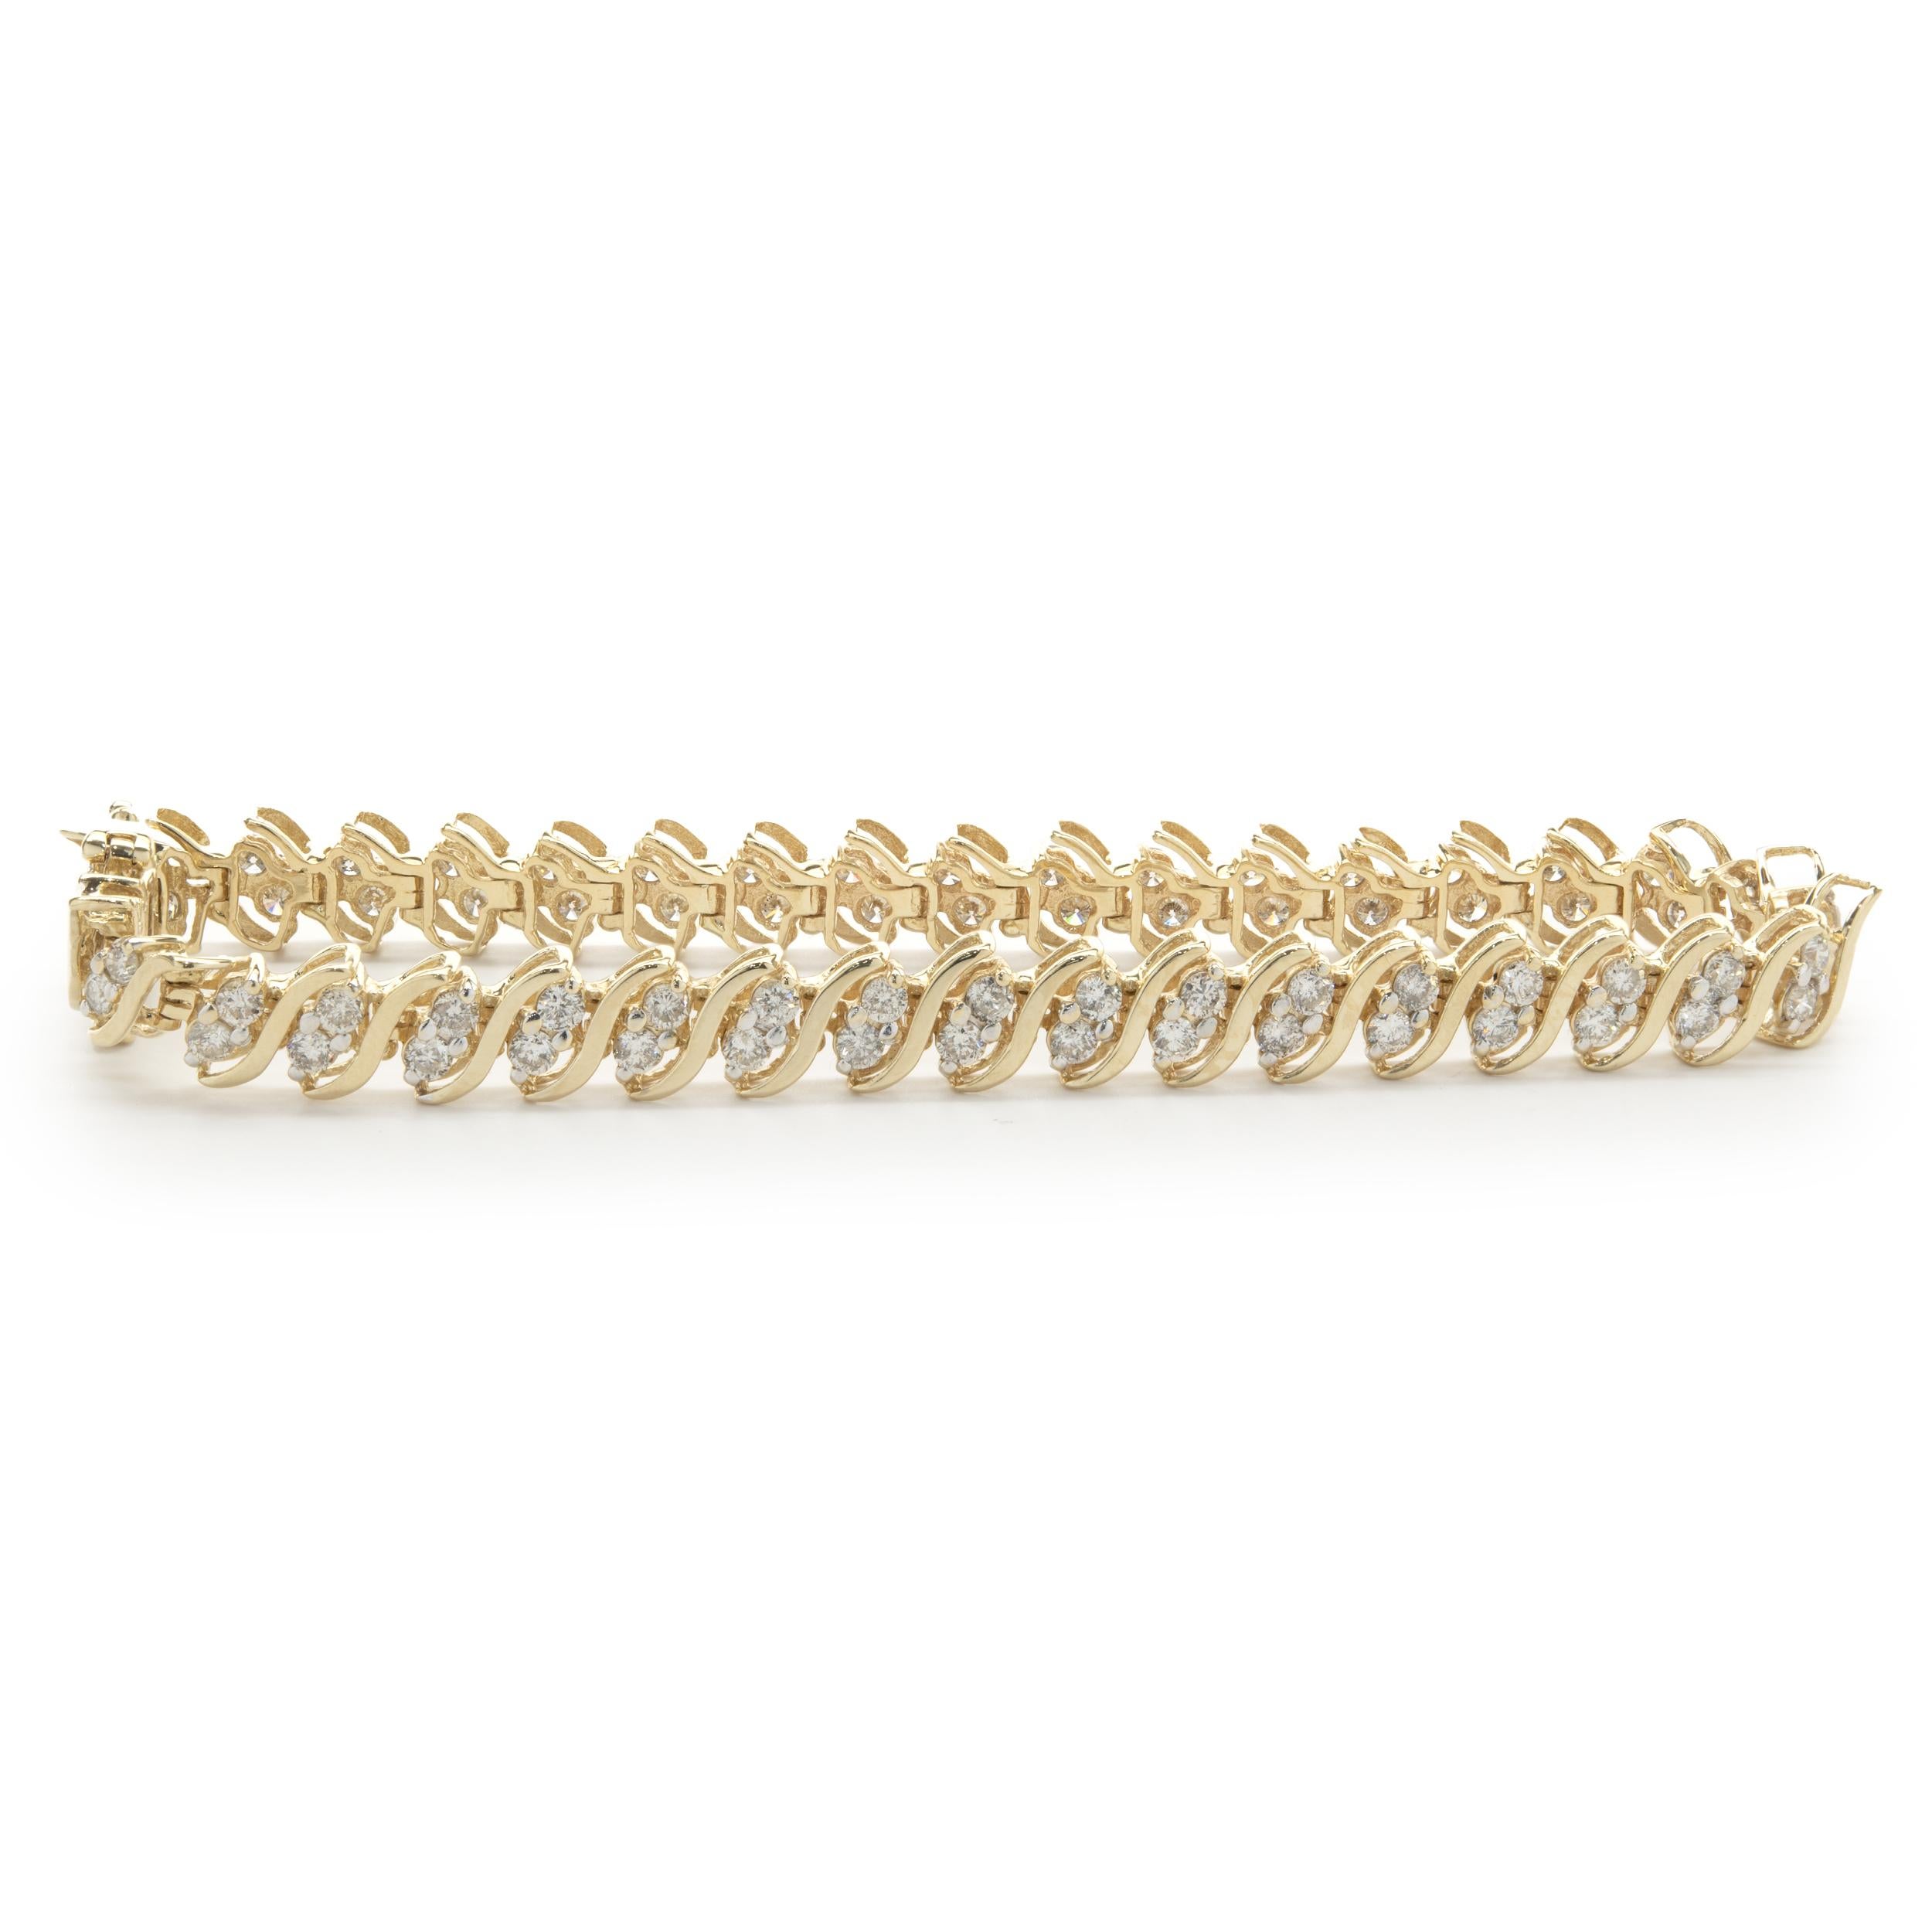 Designer: custom
Material: 14K yellow gold
Diamond: 76 round brilliant= 4.56cttw
Color: G / H
Clarity: SI1-2
Dimensions: bracelet will fit up to a 7-inch wrist
Weight: 16.62 grams
